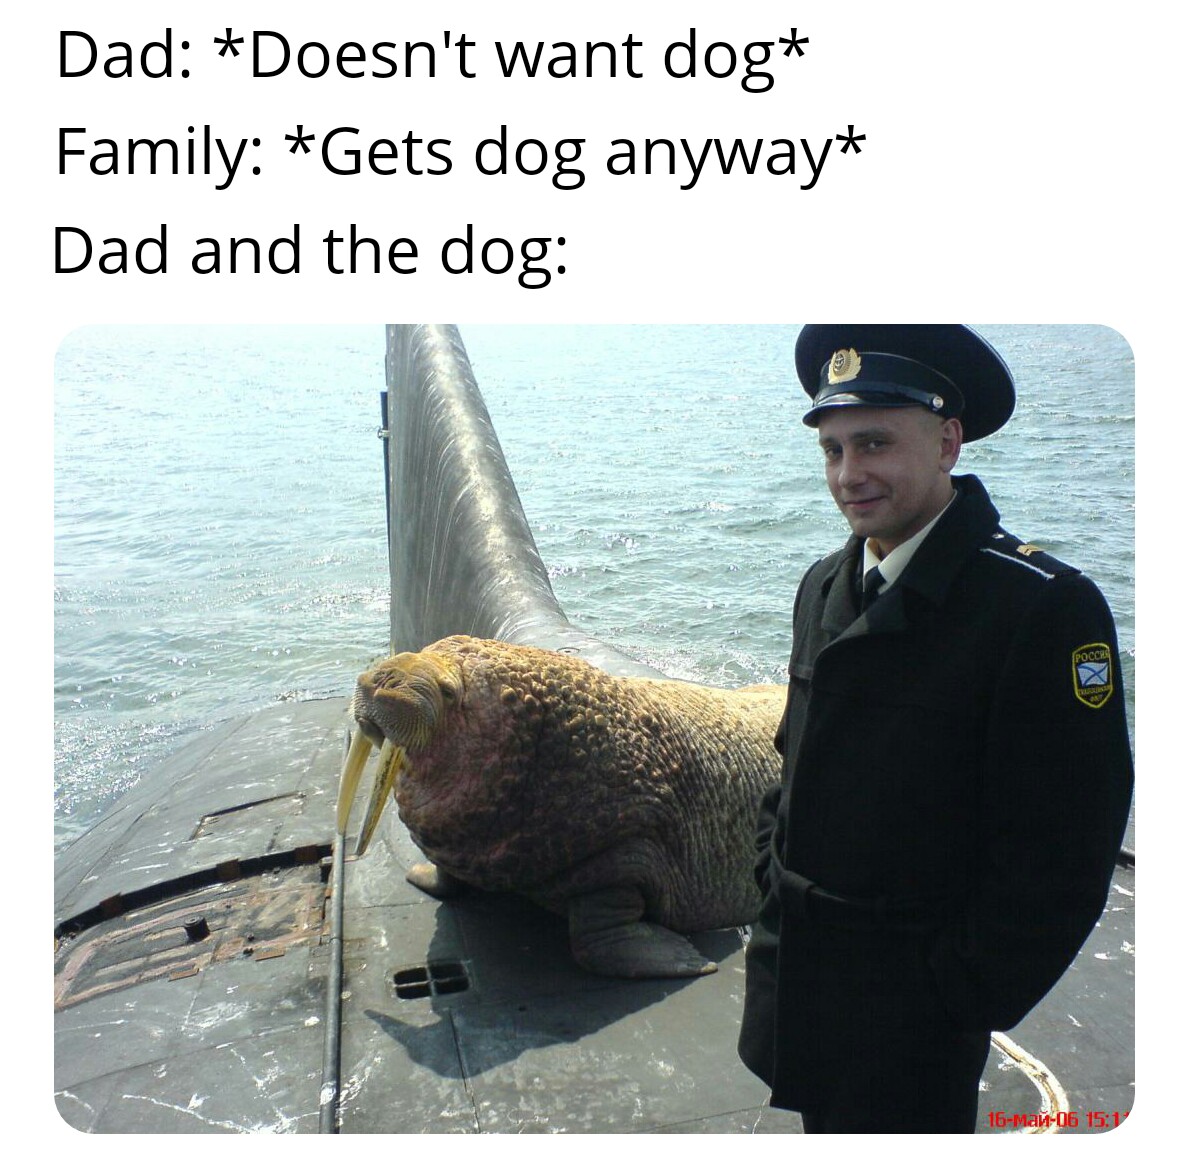 dad and dog meme - walrus on submarine - Dad Doesn't want dog Family Gets dog anyway Dad and the dog 16Mar06